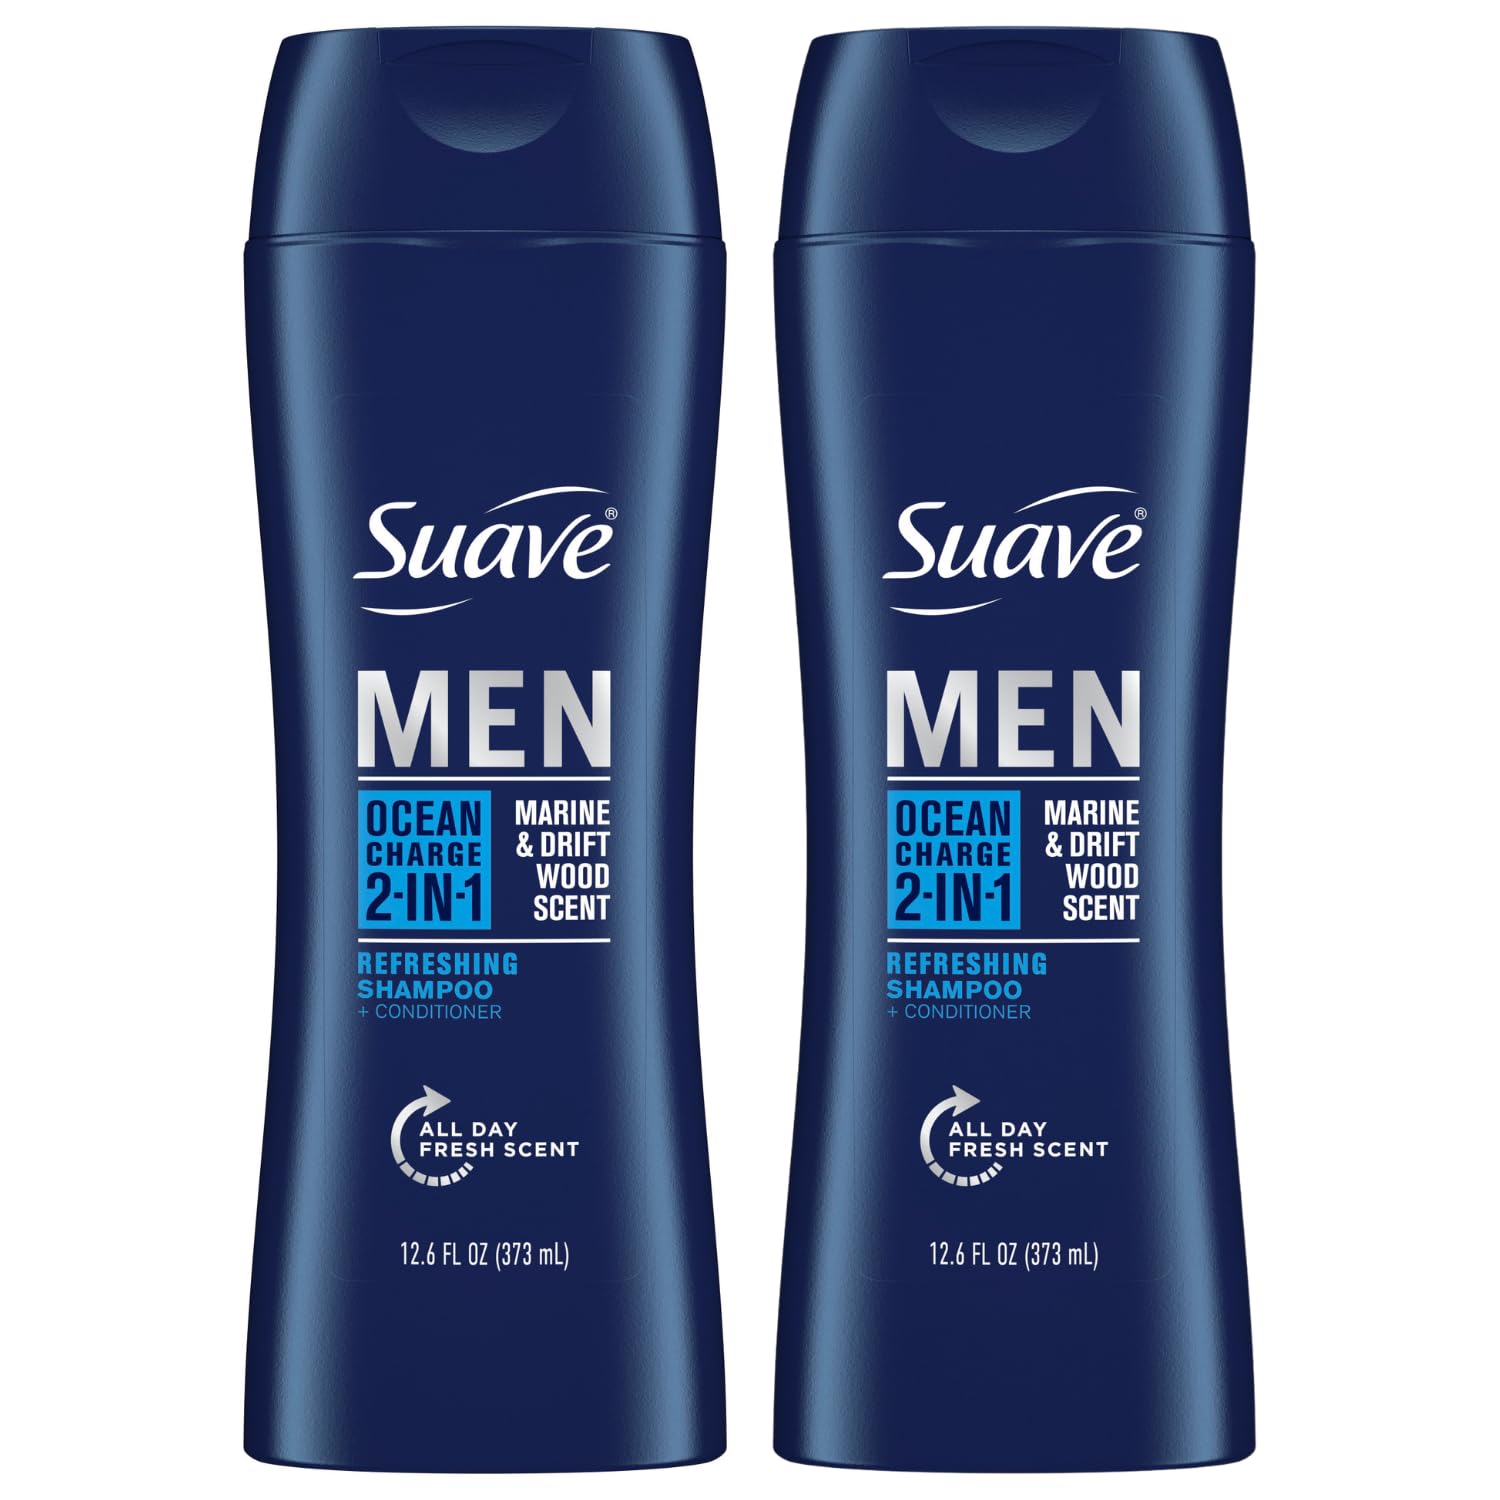 Suave Men Shampoo and Conditioner 2 in 1 Ocean Charge – Vitamin & Moisture-Rich Mens Shampoo and Conditioner Set in One Recyclable Bottle, Fresh, Clean Scent, 12.6 Oz Ea (Pack of 2)